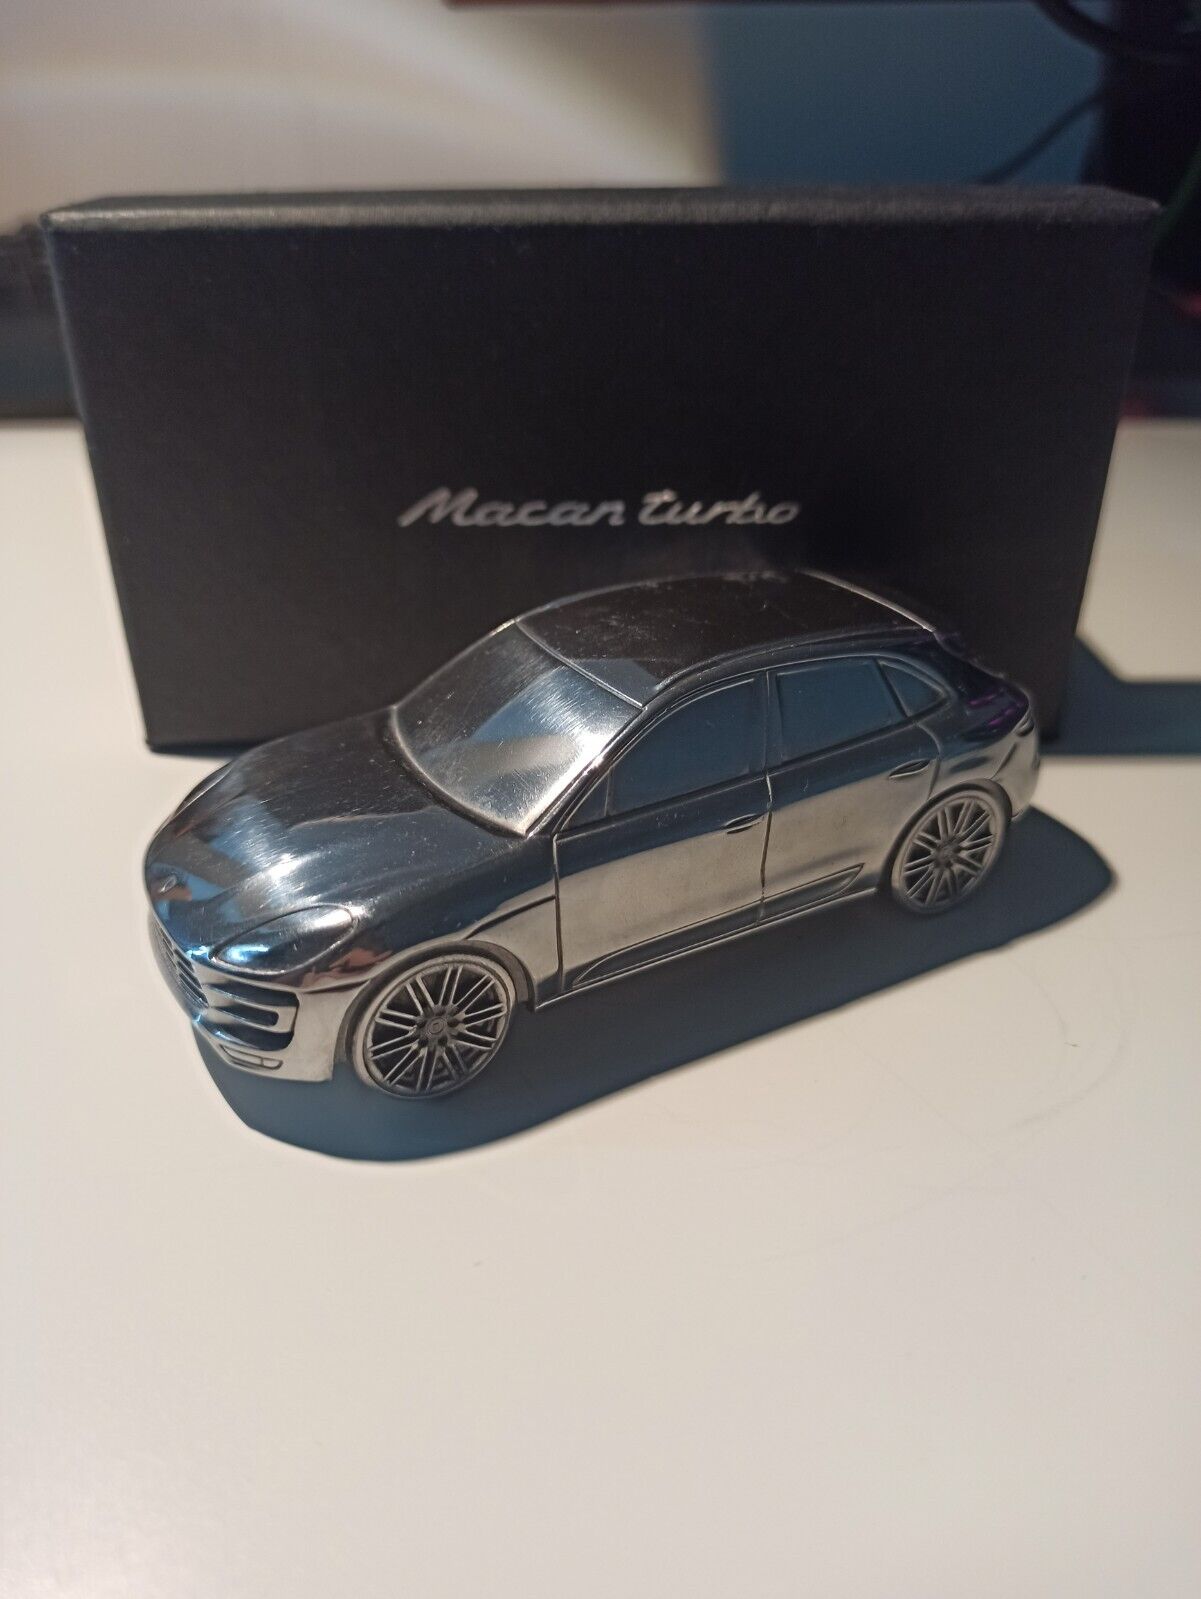 Porsche Macan Turbo Limited Edition Chrome model Aluminum Paperweight 1:43